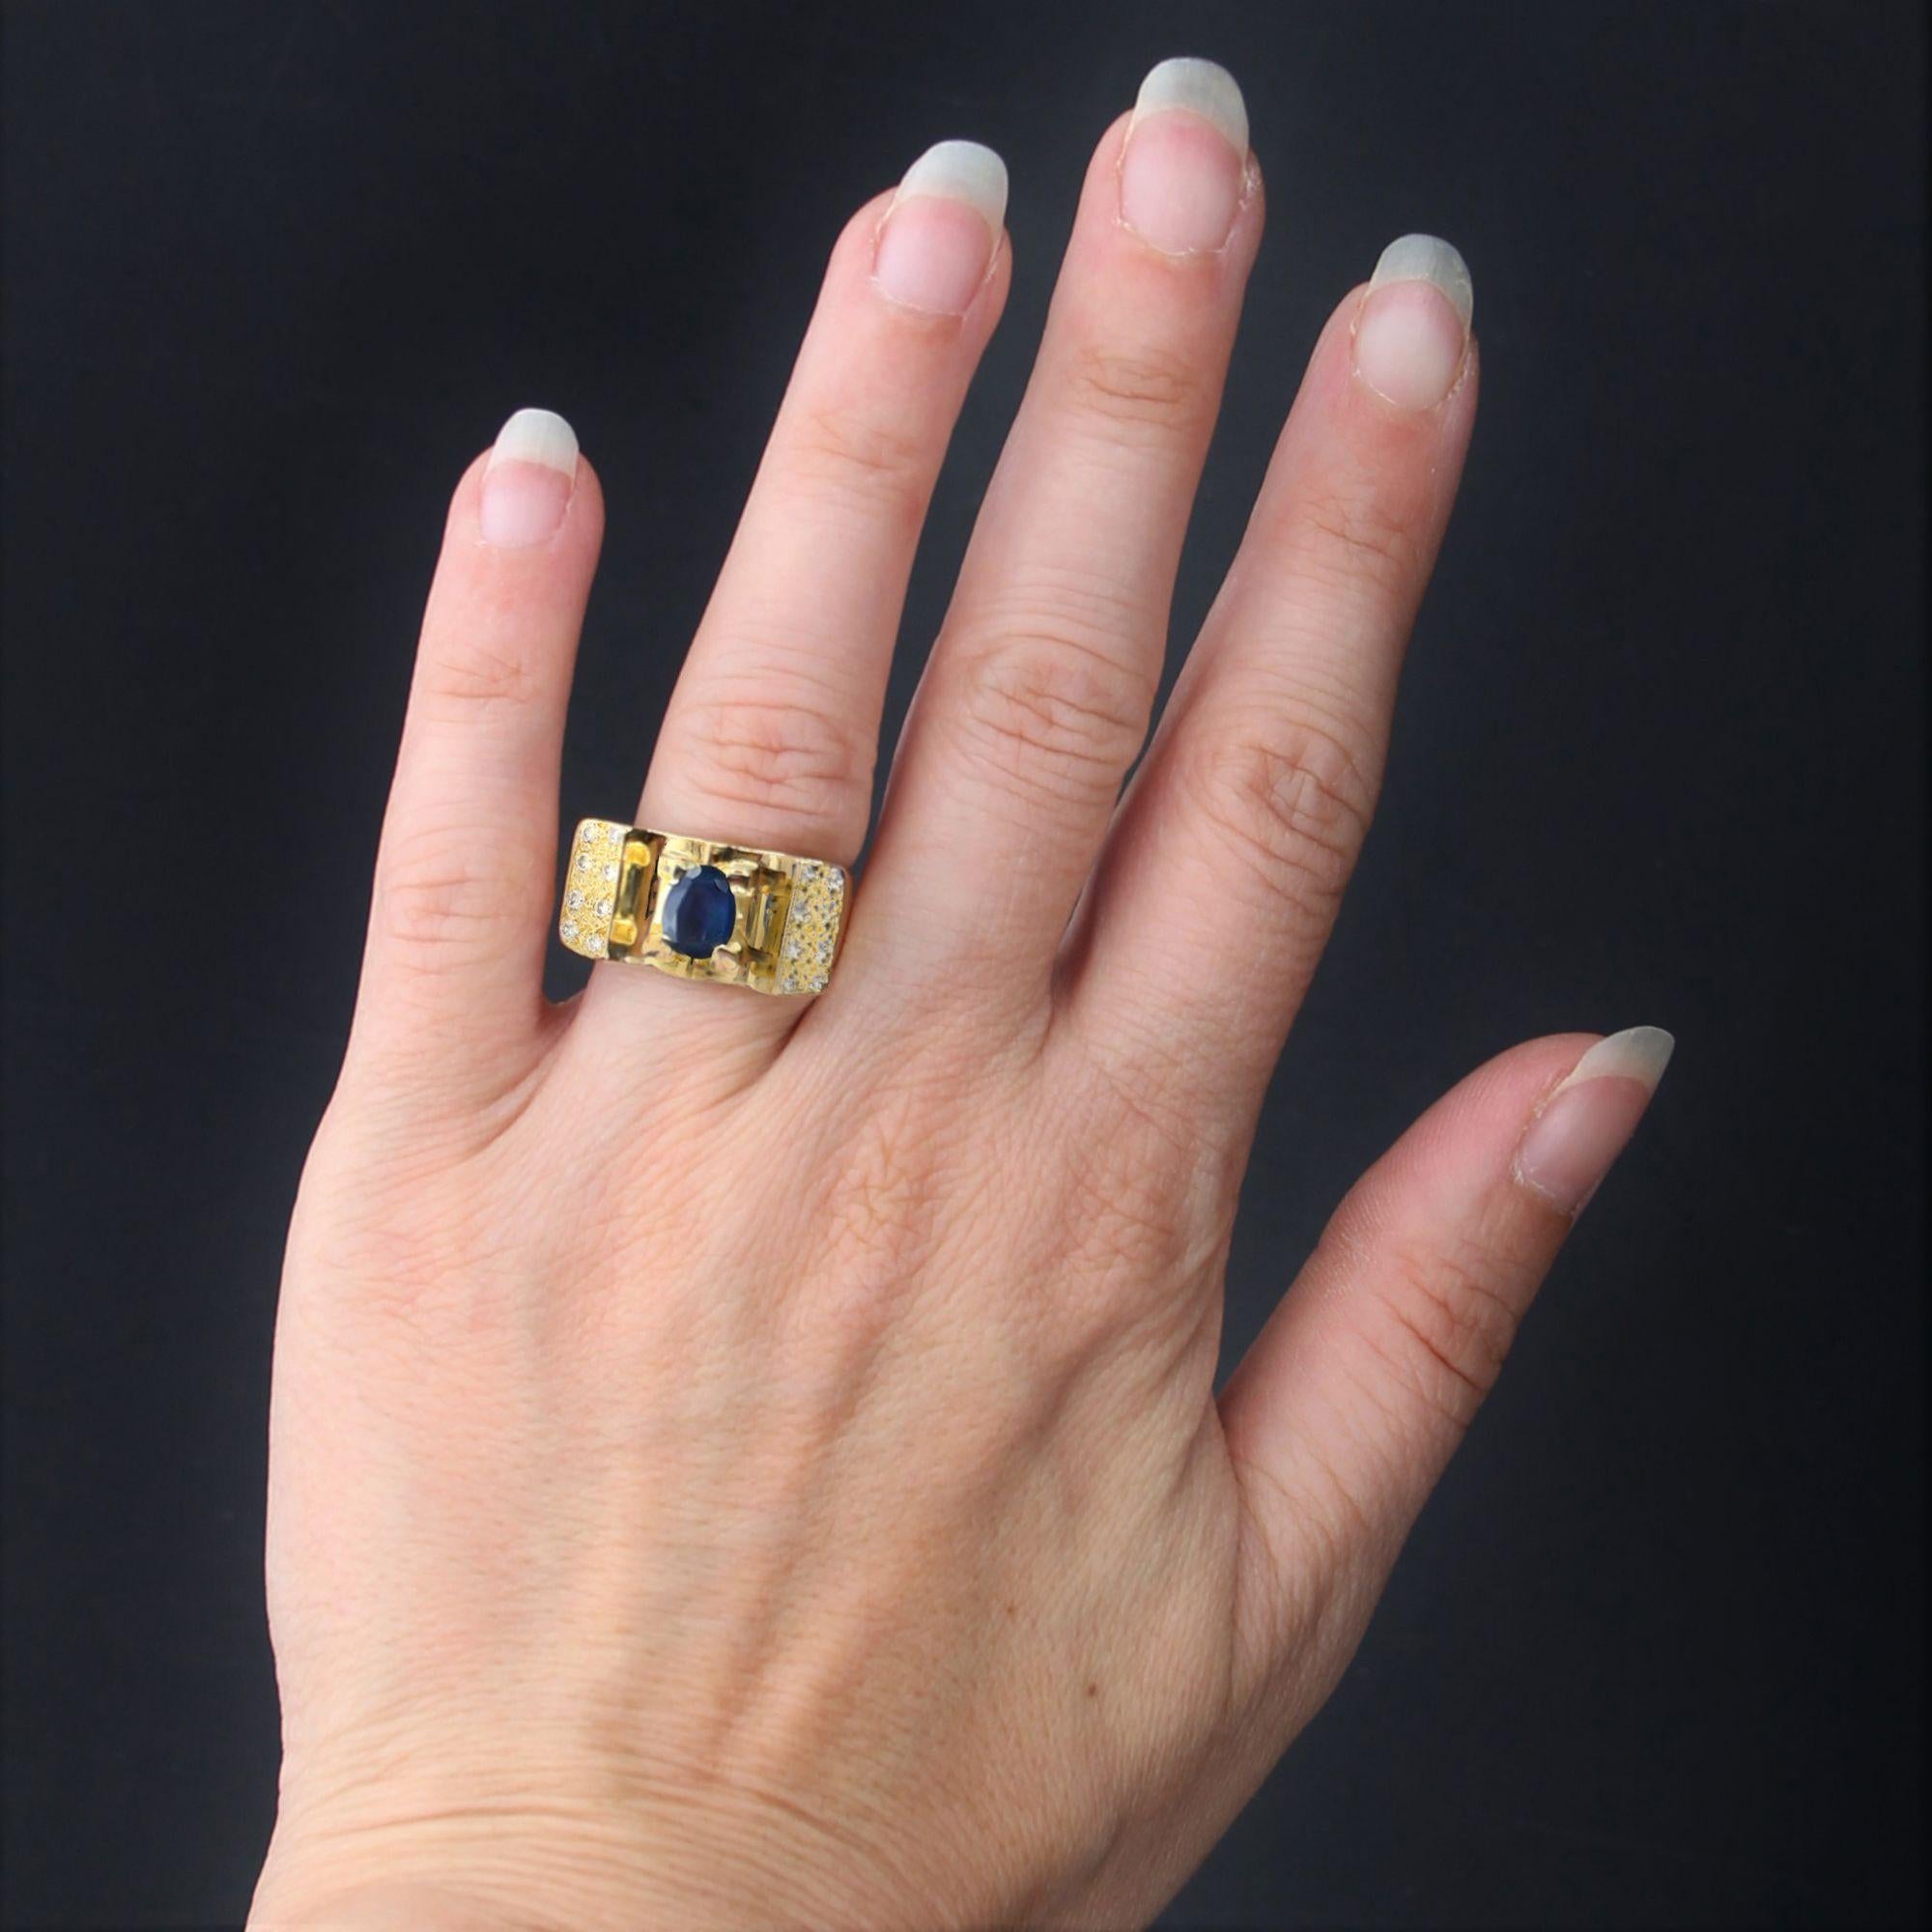 Ring in 18 karat yellow gold, eagle head hallmark.
This sapphire ring is inspired by the tank rings of the 1940s. Bridge-shaped, it is set with 4 large claws of an oval faceted sapphire supported on both sides by 8 brilliant-cut diamonds in pearl